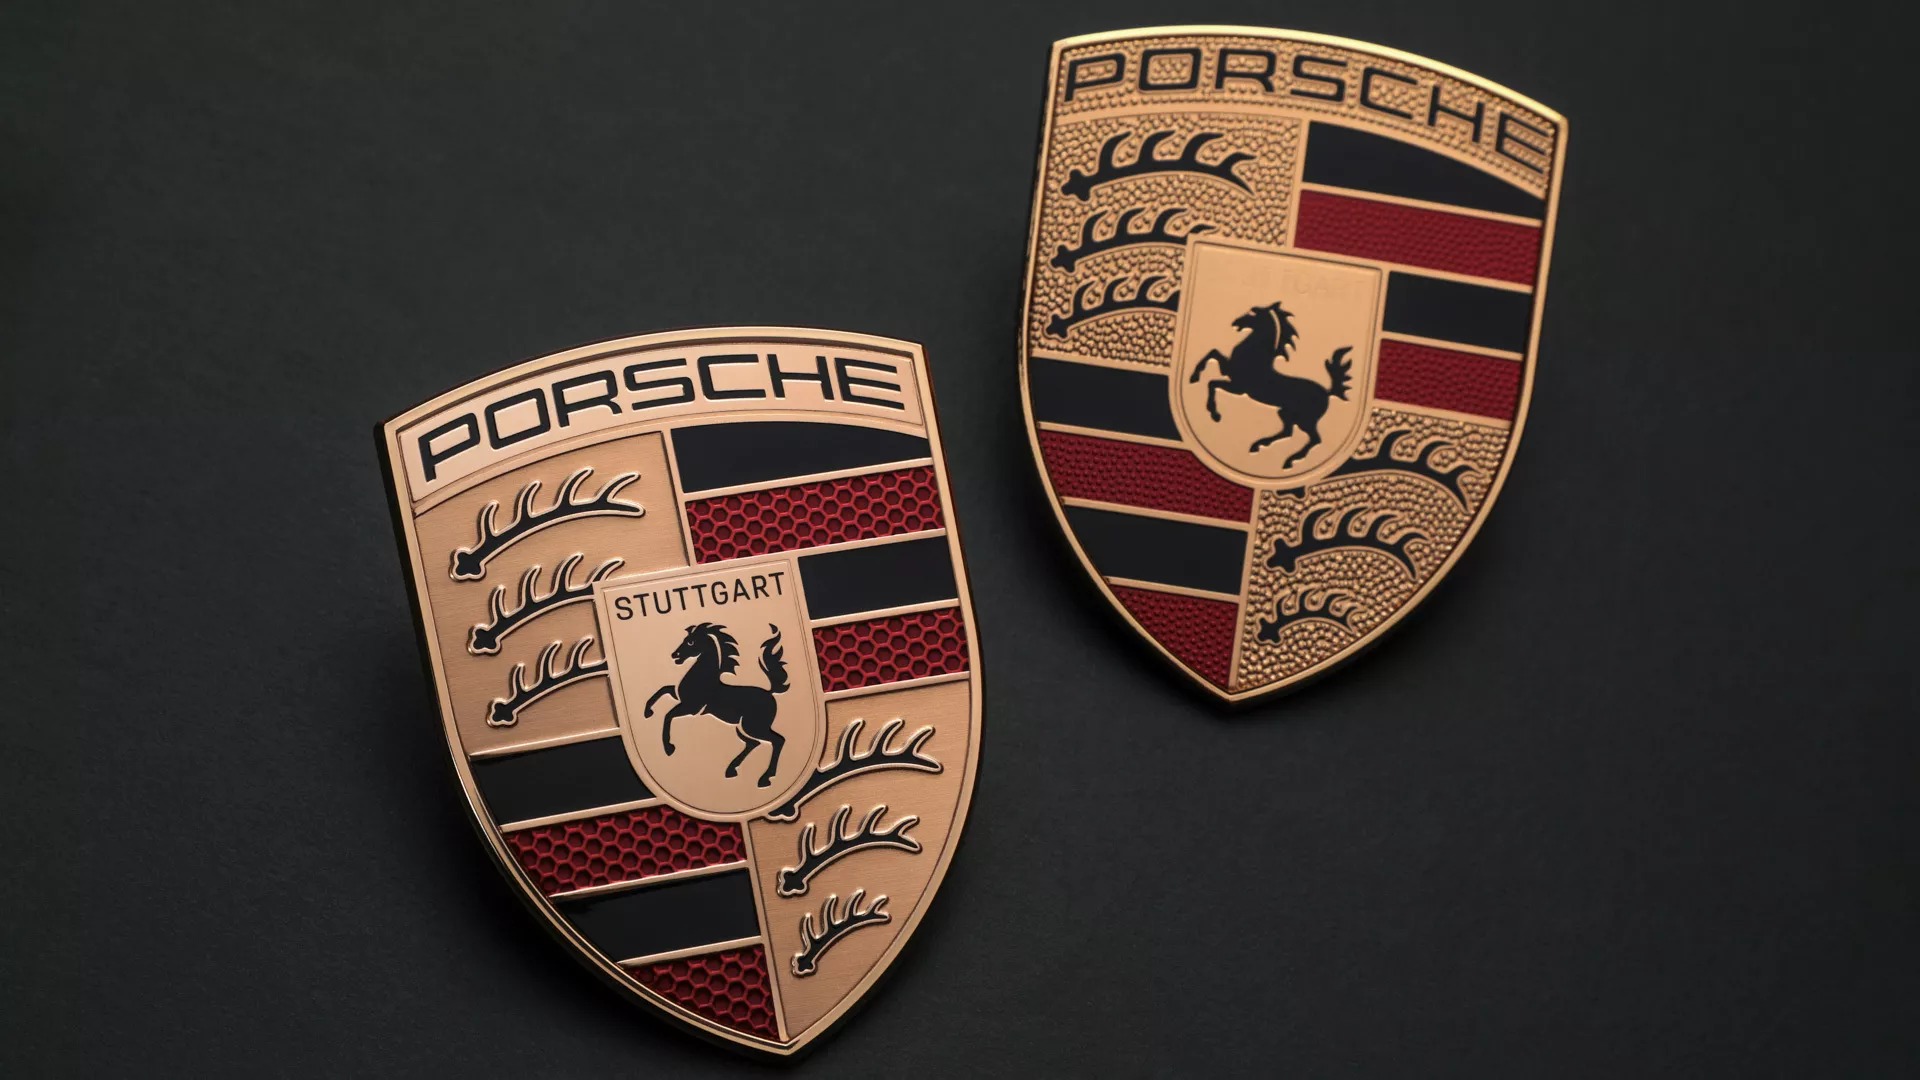 Porsche took 3 years to come up with a new logo but it took a lot of ...